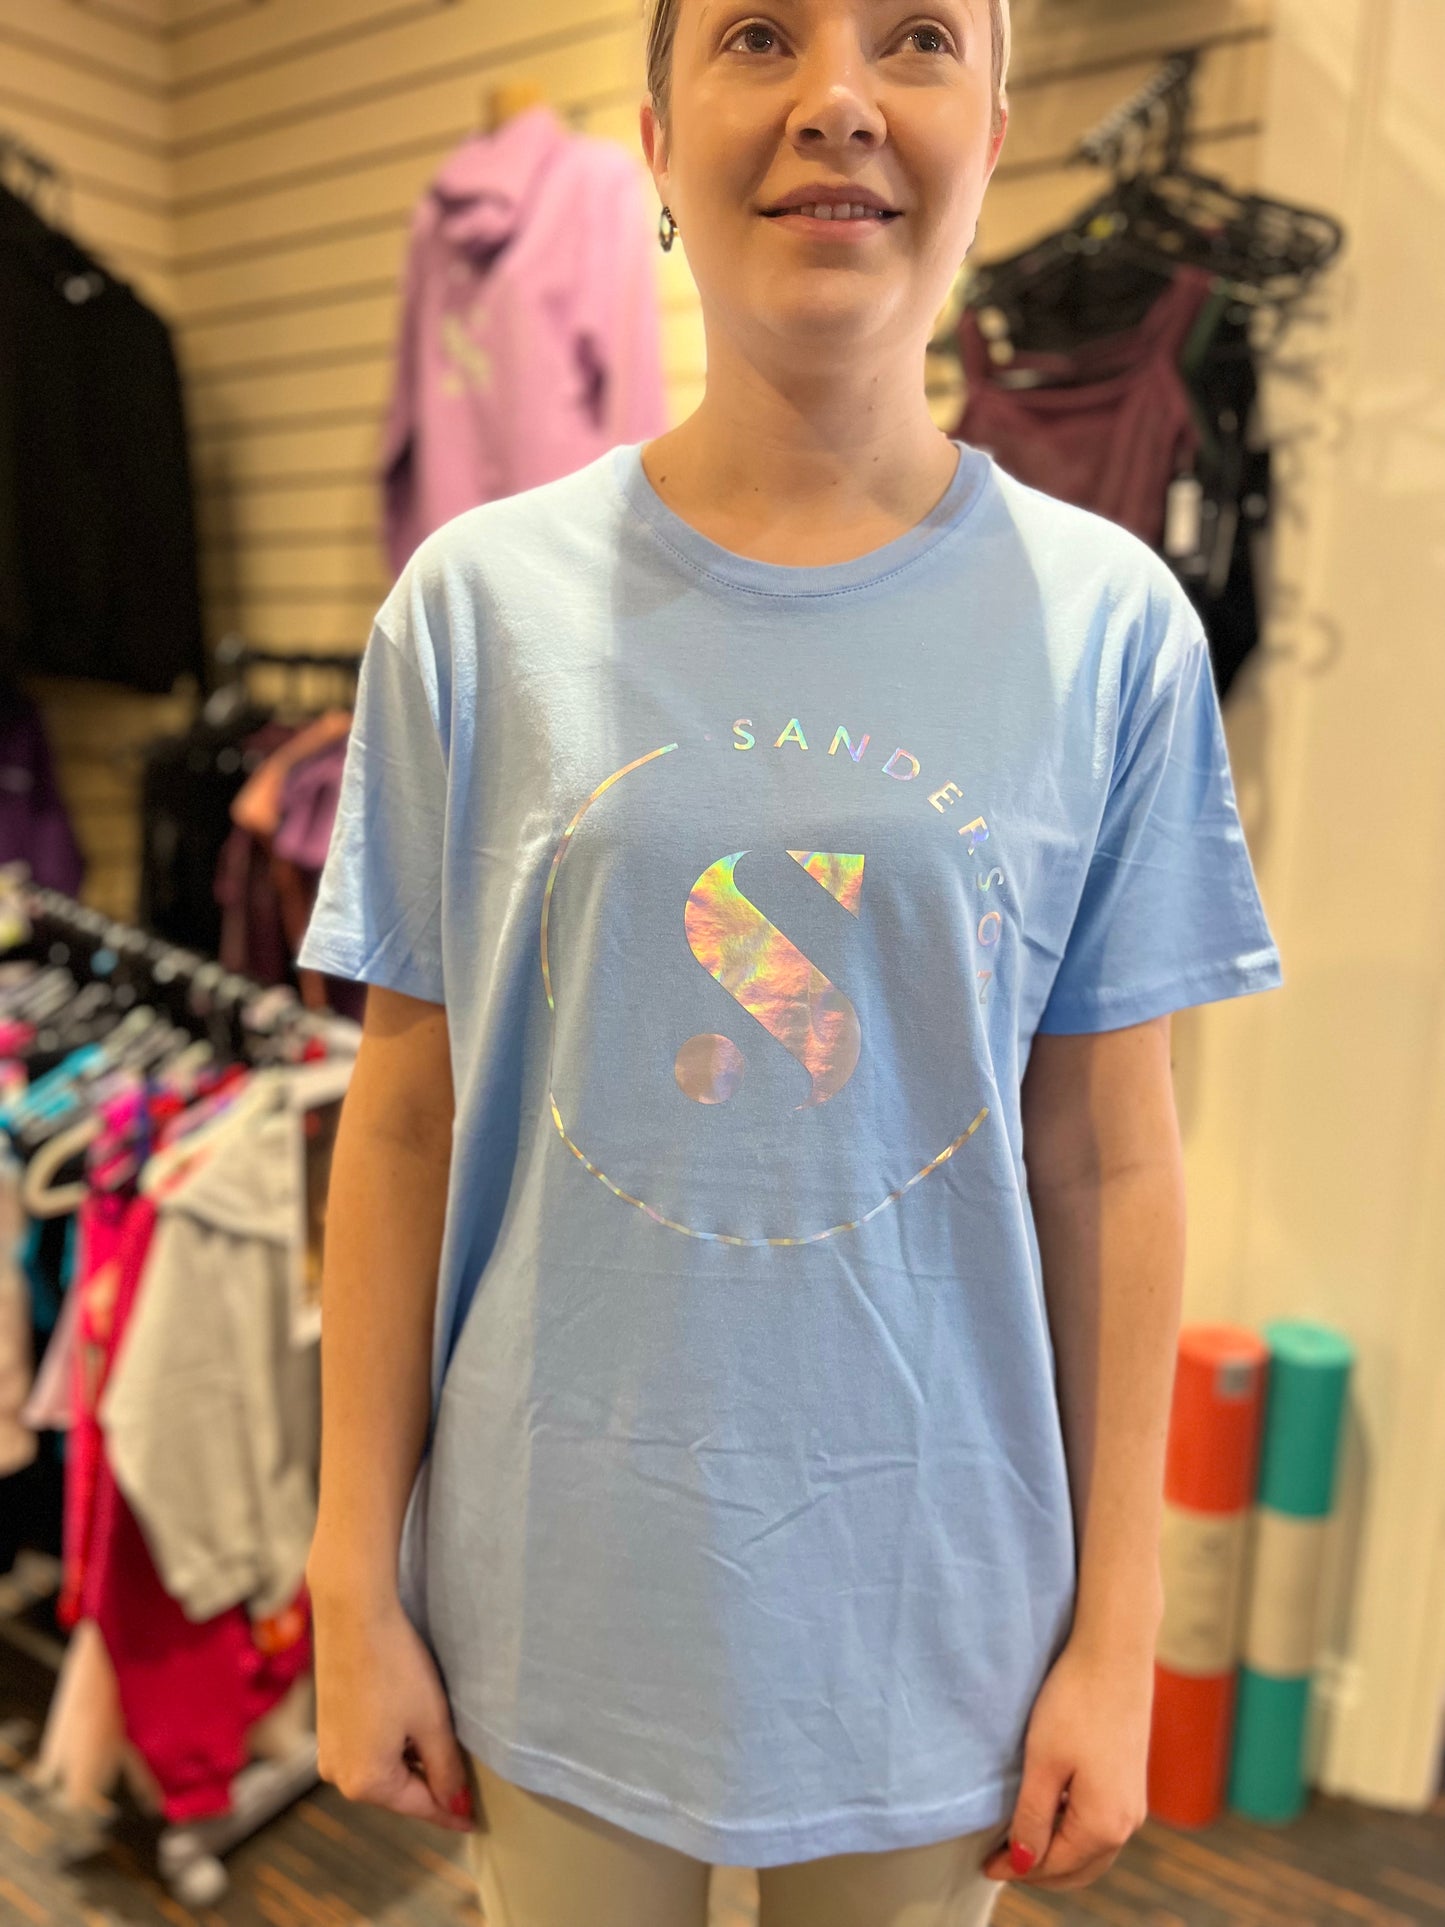 KIDS & ADULTS BLUE SANDERSONS T SHIRT WITH HOLOGRAPHIC LOGO